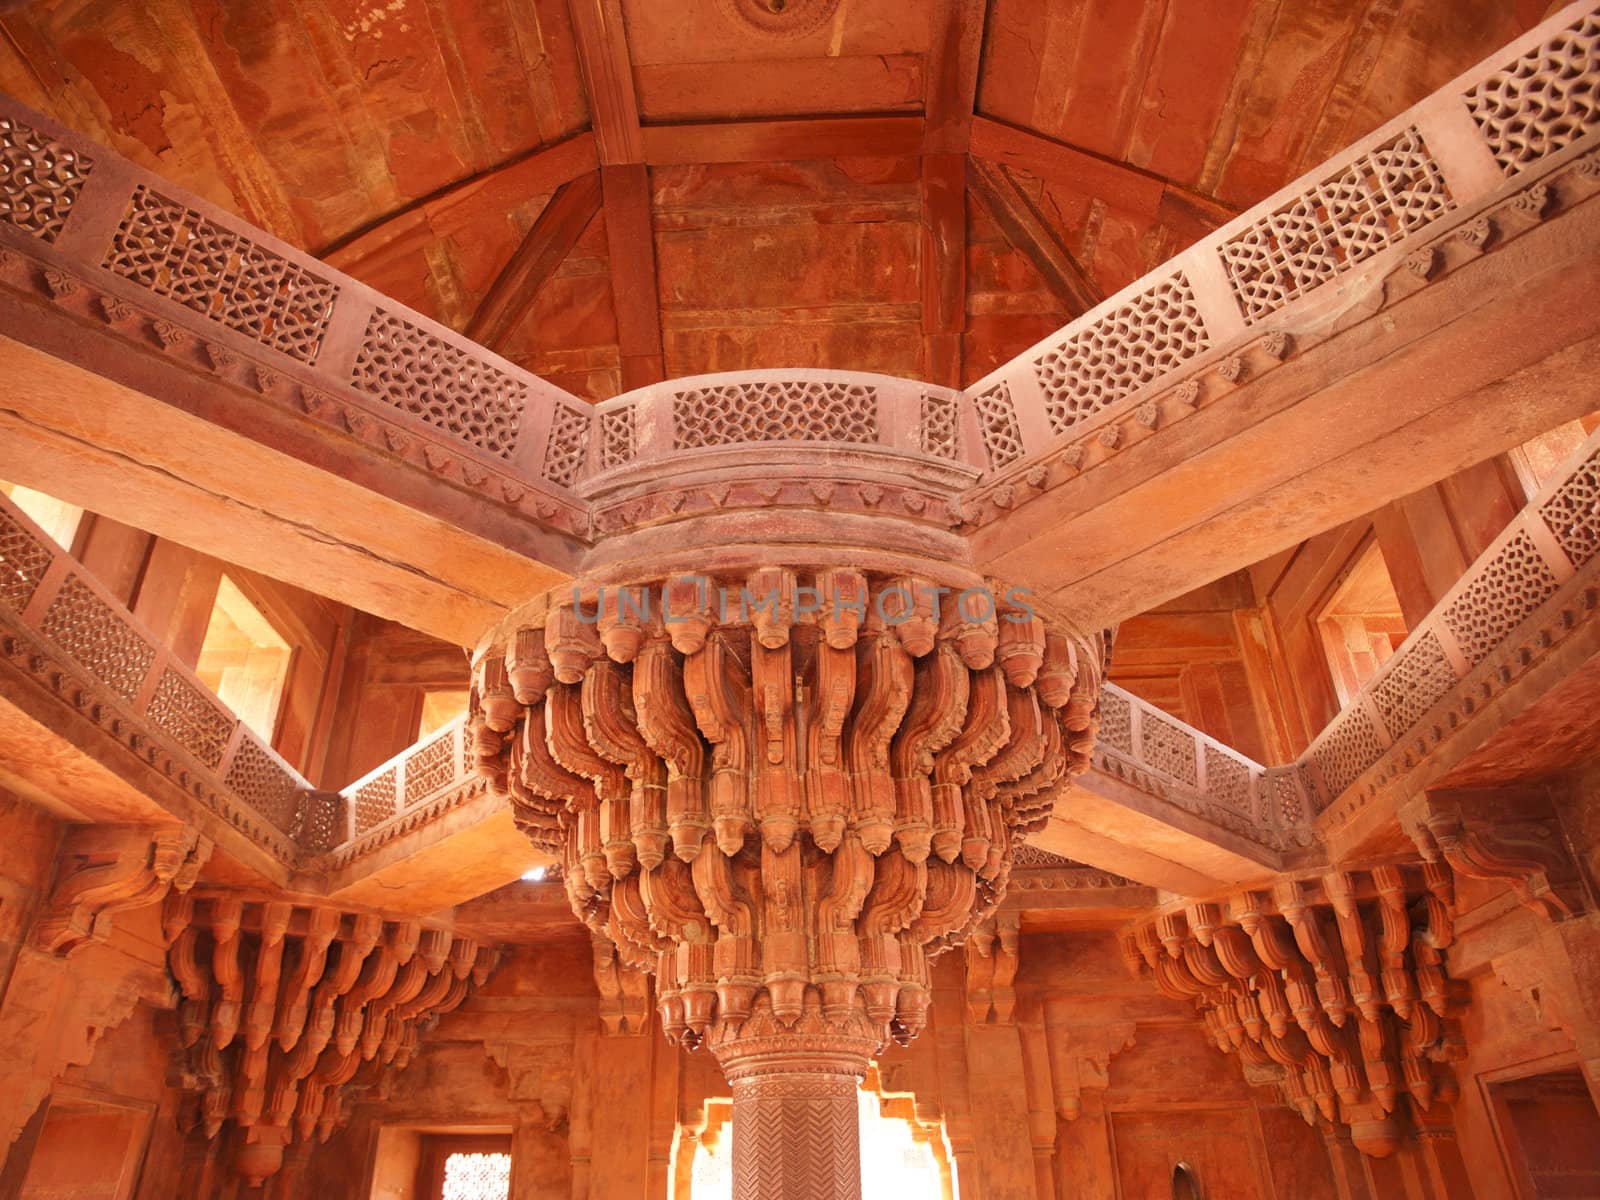 The central pillar of Diwan-i-khas in the Fatehpur Sikri, Agra district, India